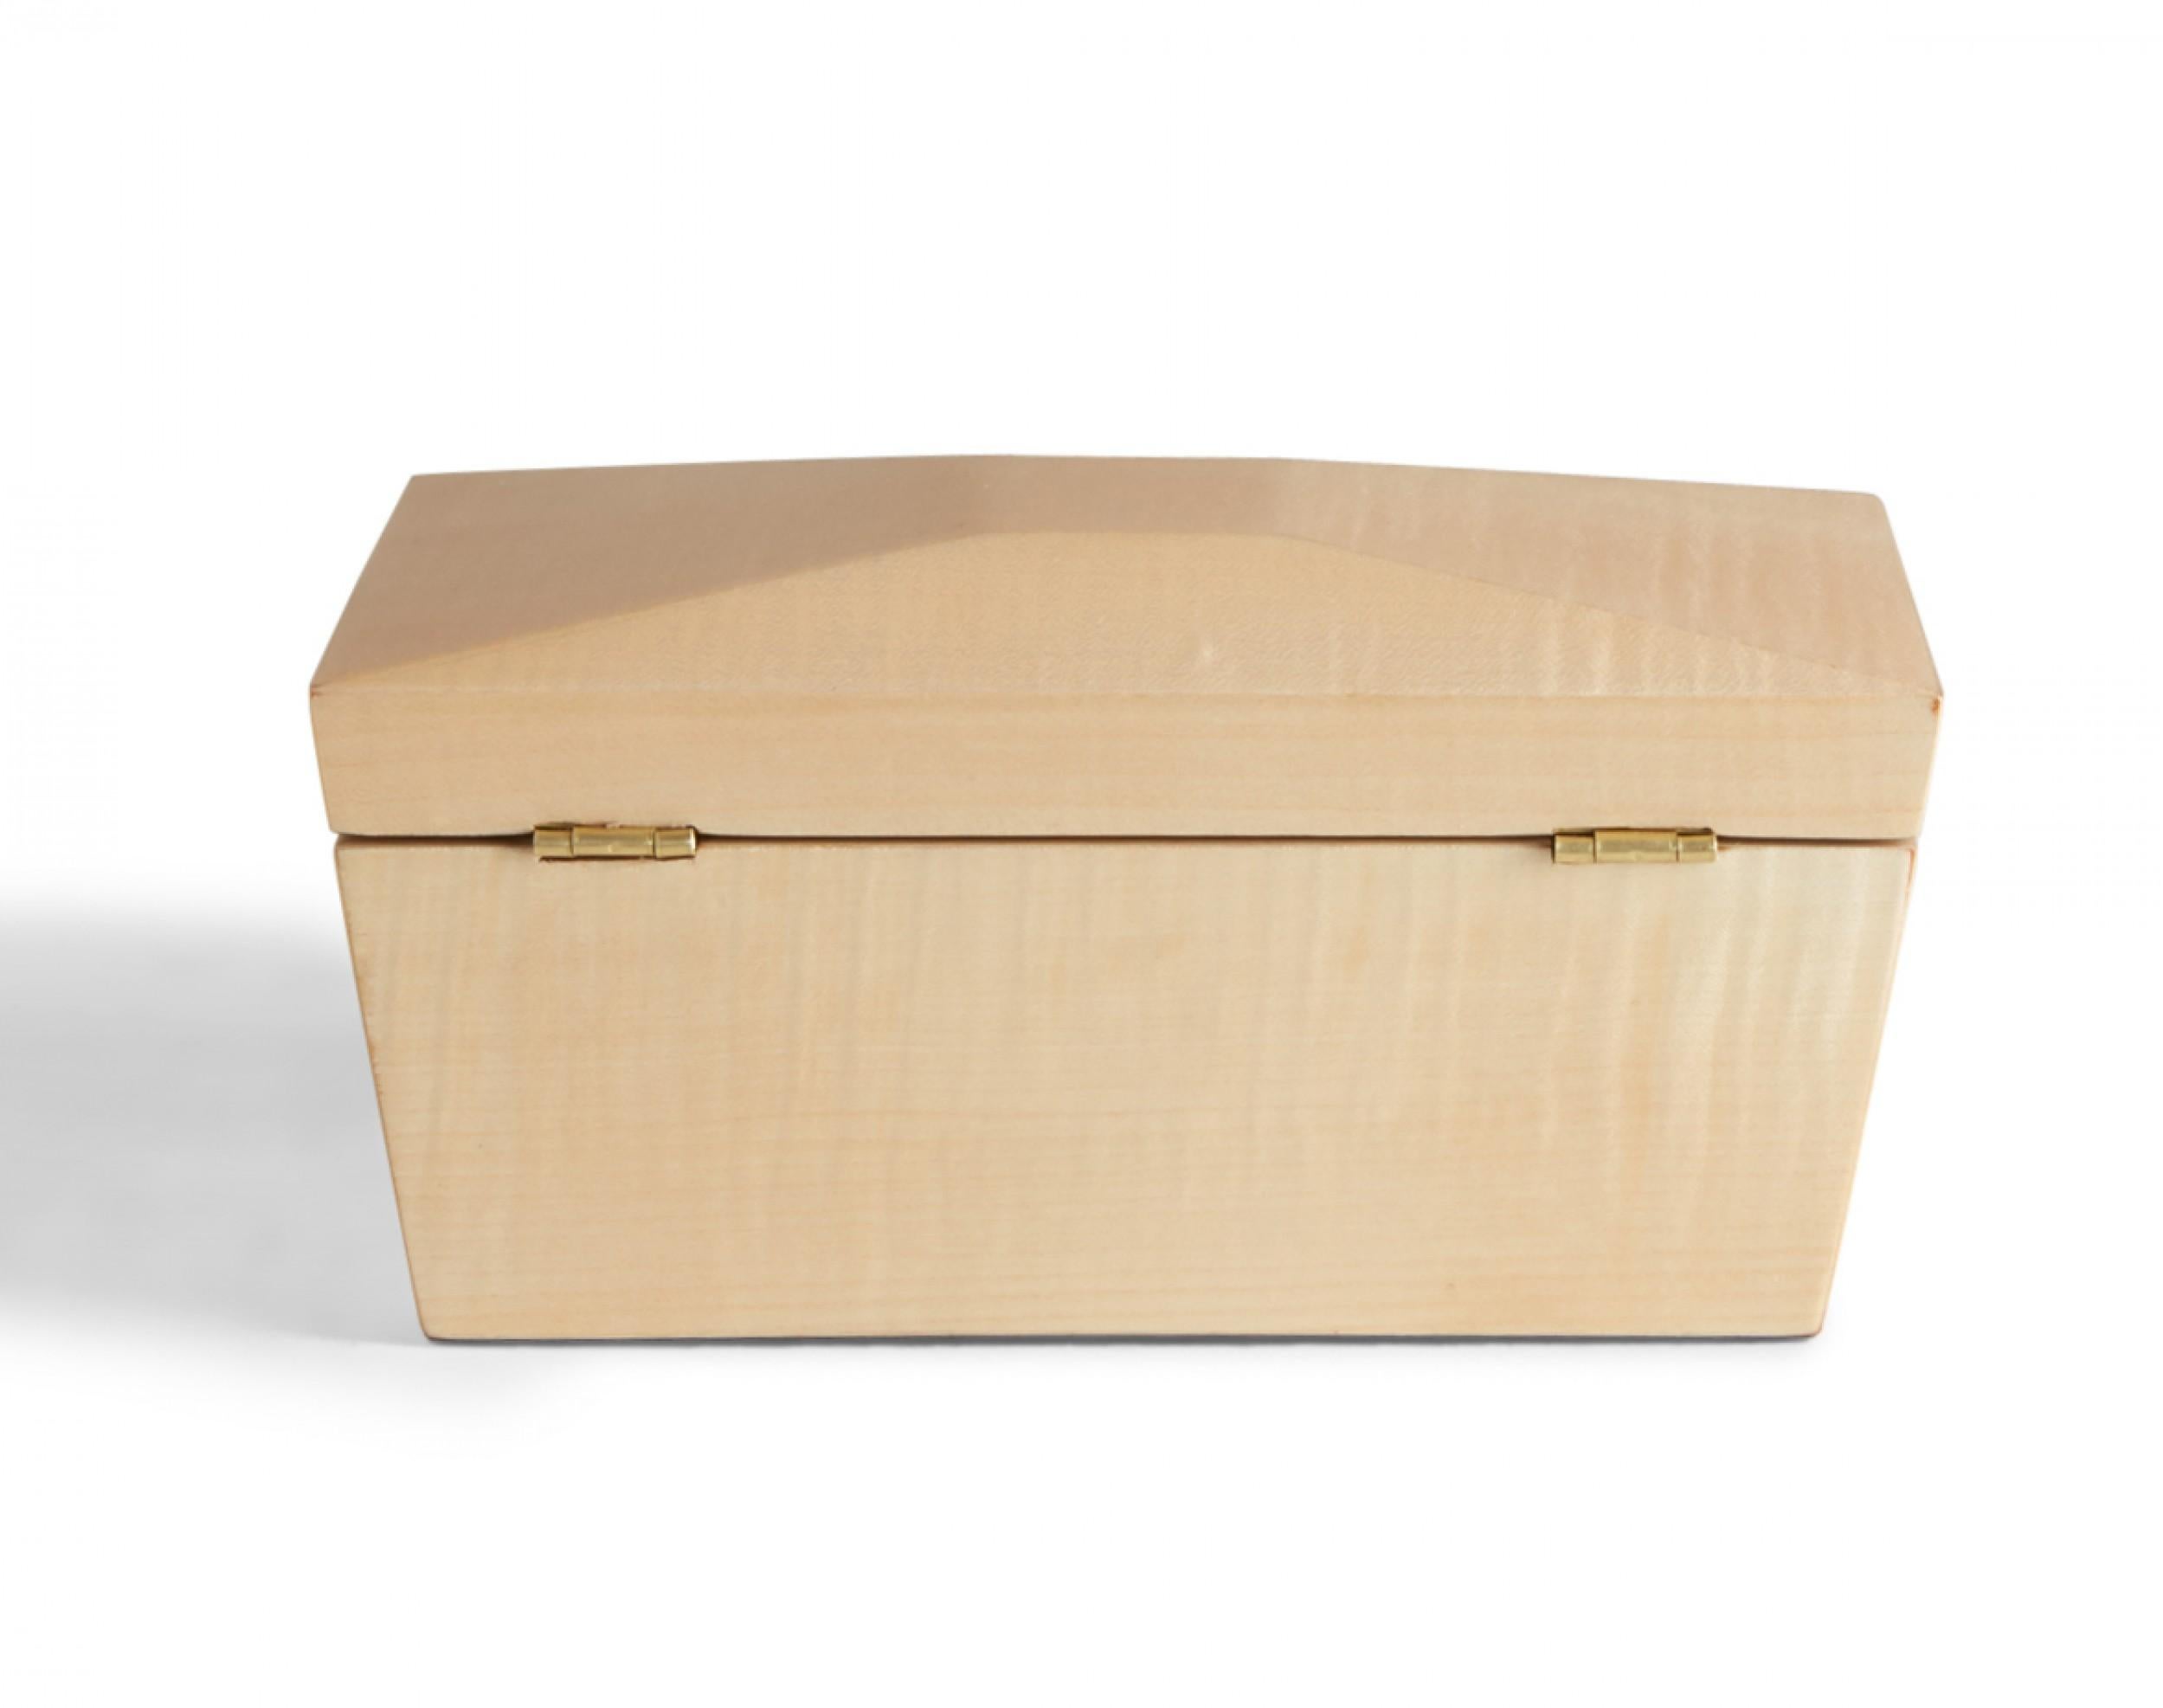 Contemporary Lacquered Blond Maple Rectangular Decorative Box In Good Condition For Sale In New York, NY